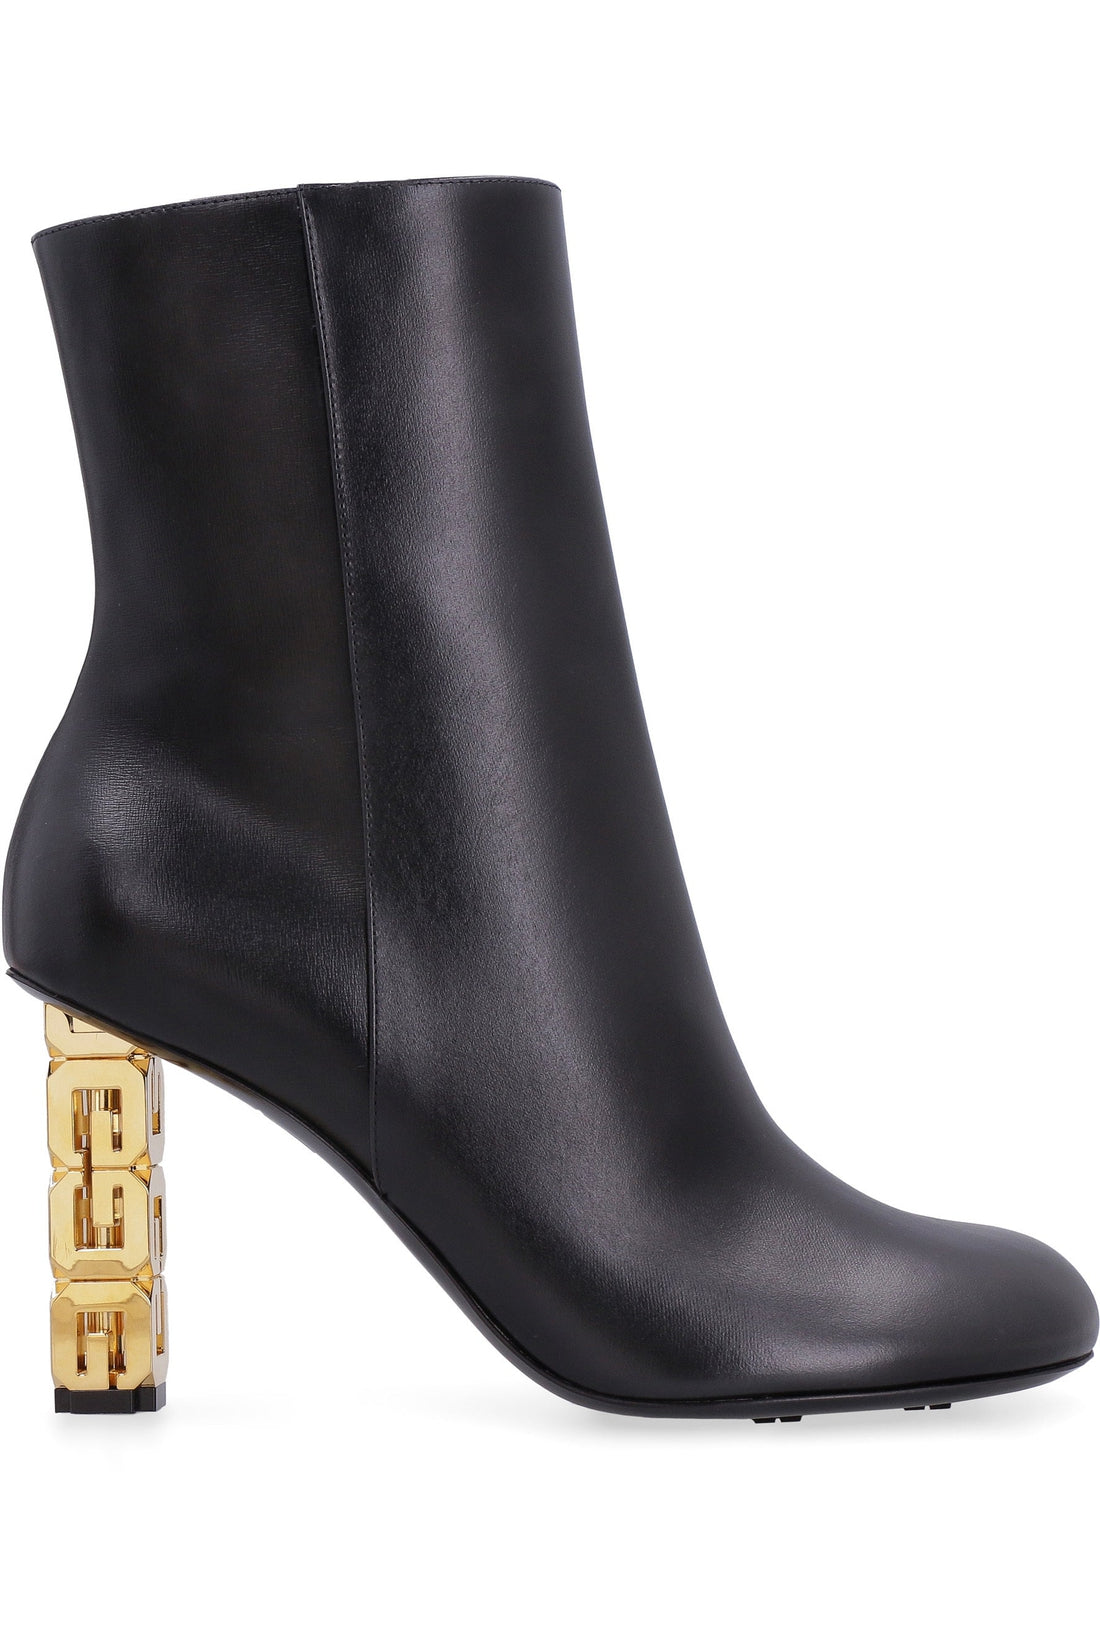 Givenchy-OUTLET-SALE-G-Cube leather ankle boots-ARCHIVIST